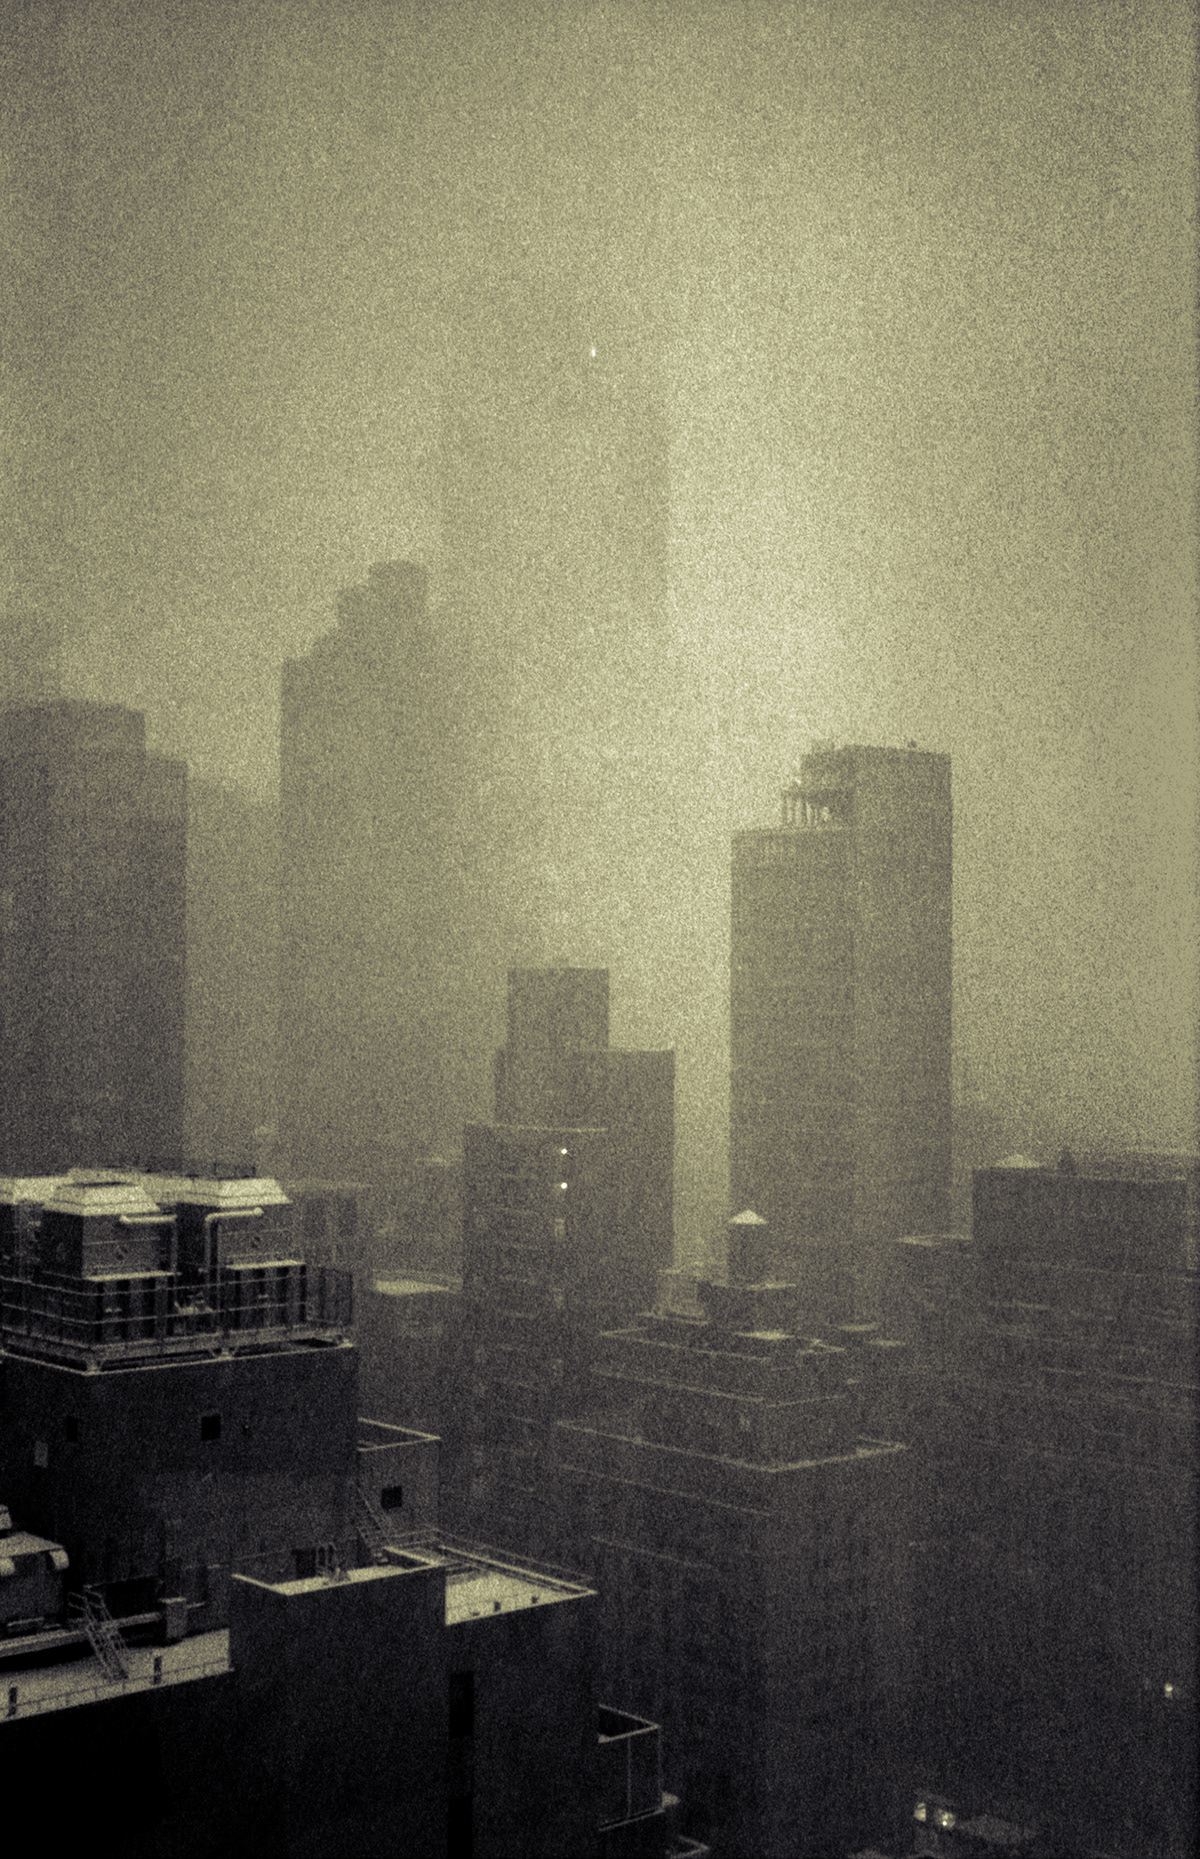 Skyscrapers in a snowstorm in New York City.